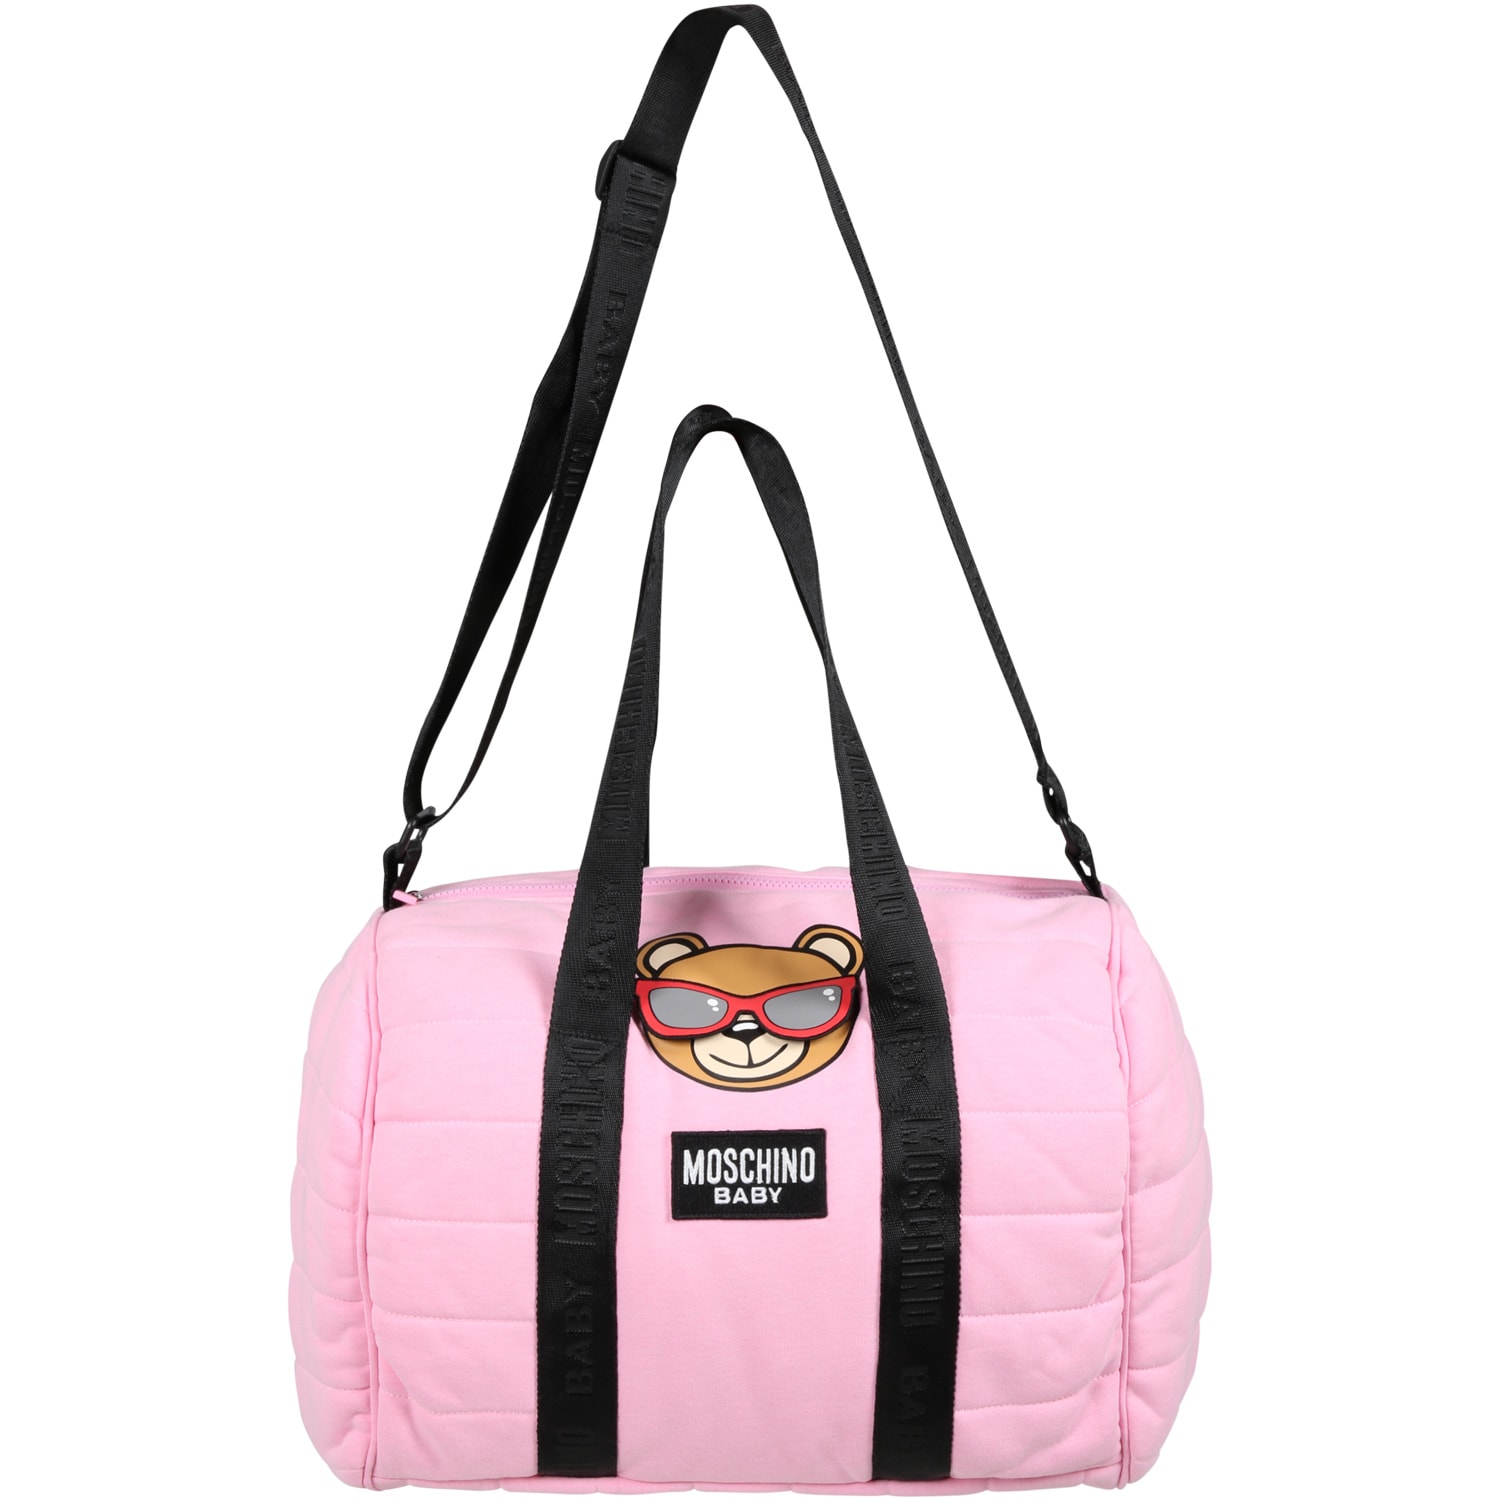 Moschino Pink Changing Bag For Baby Girl With Teddy Bear